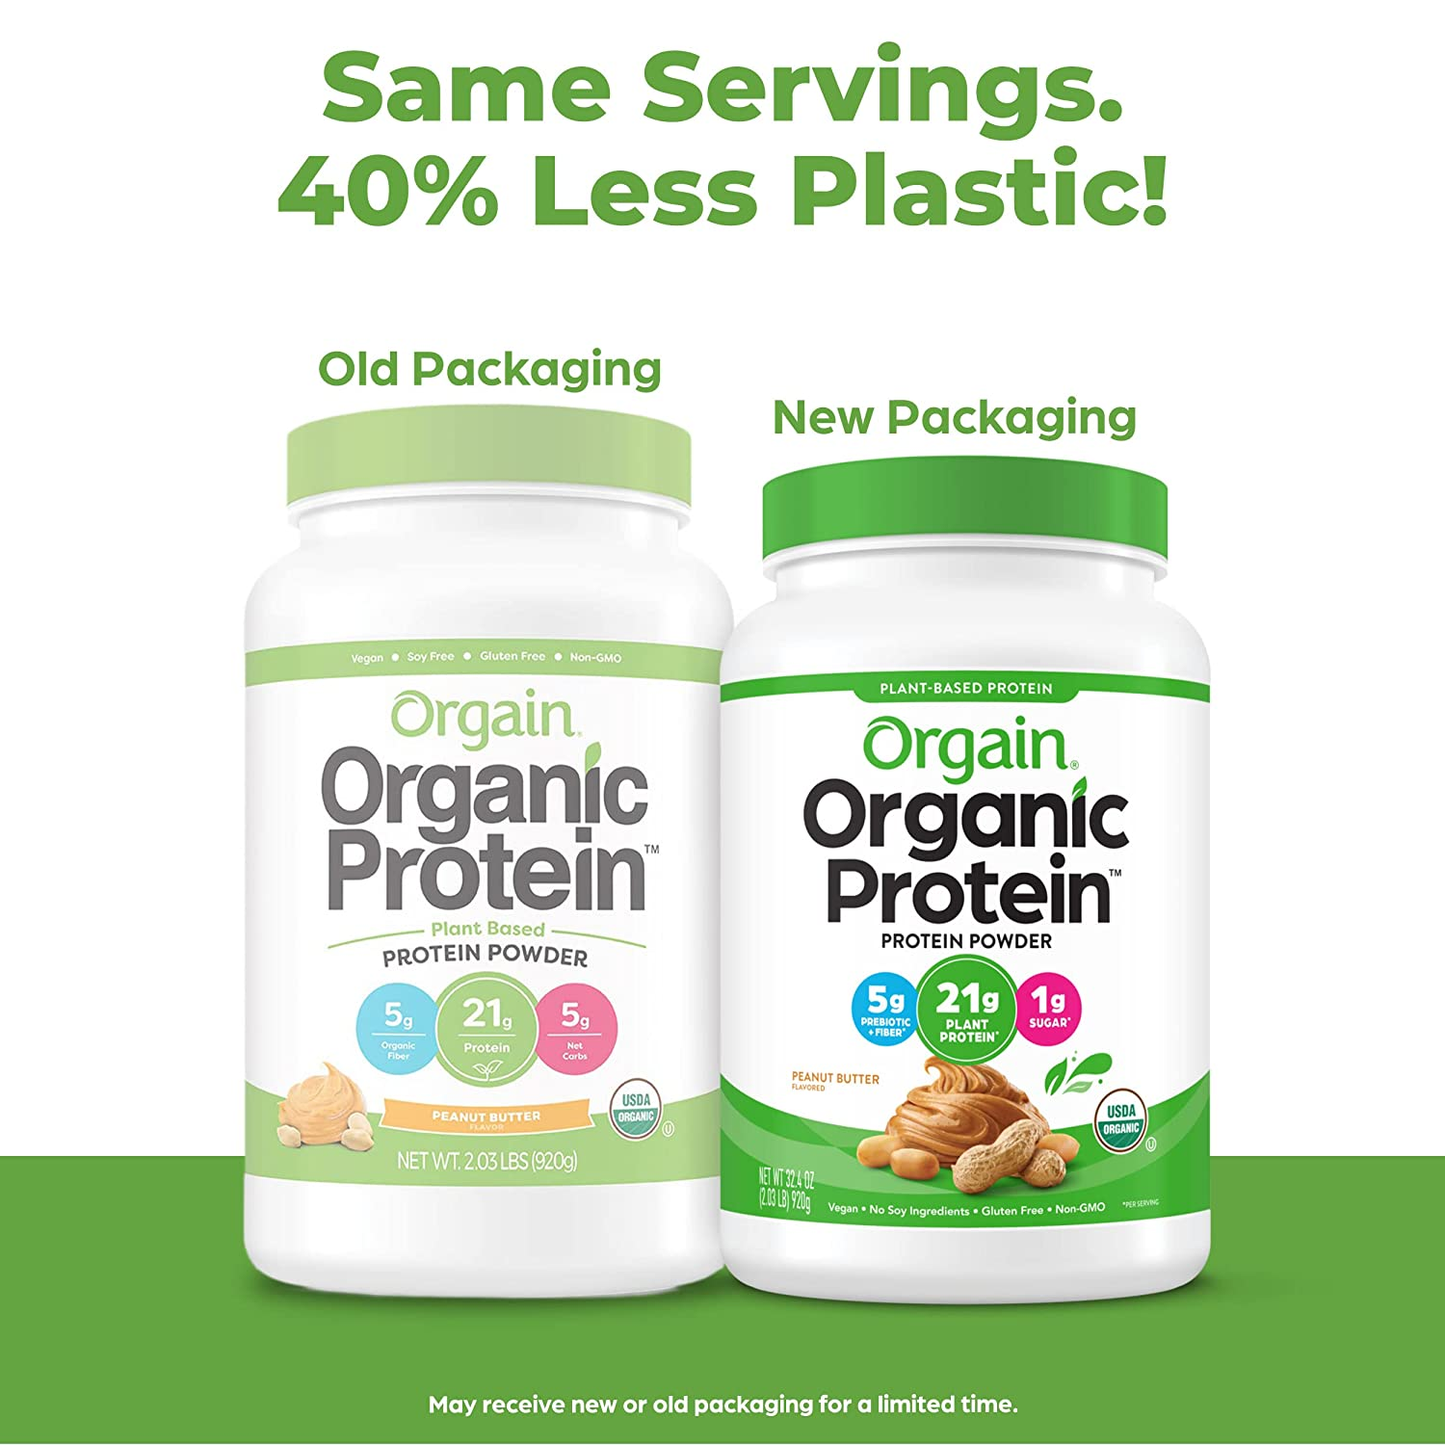 Orgain Organic Plant Based Protein Powder, Peanut Butter - 21G of Protein, Vegan, Low Net Carbs, Non Dairy, Gluten Free, Lactose Free, No Sugar Added, Soy Free, Kosher, Non-Gmo, 2.03 Pound